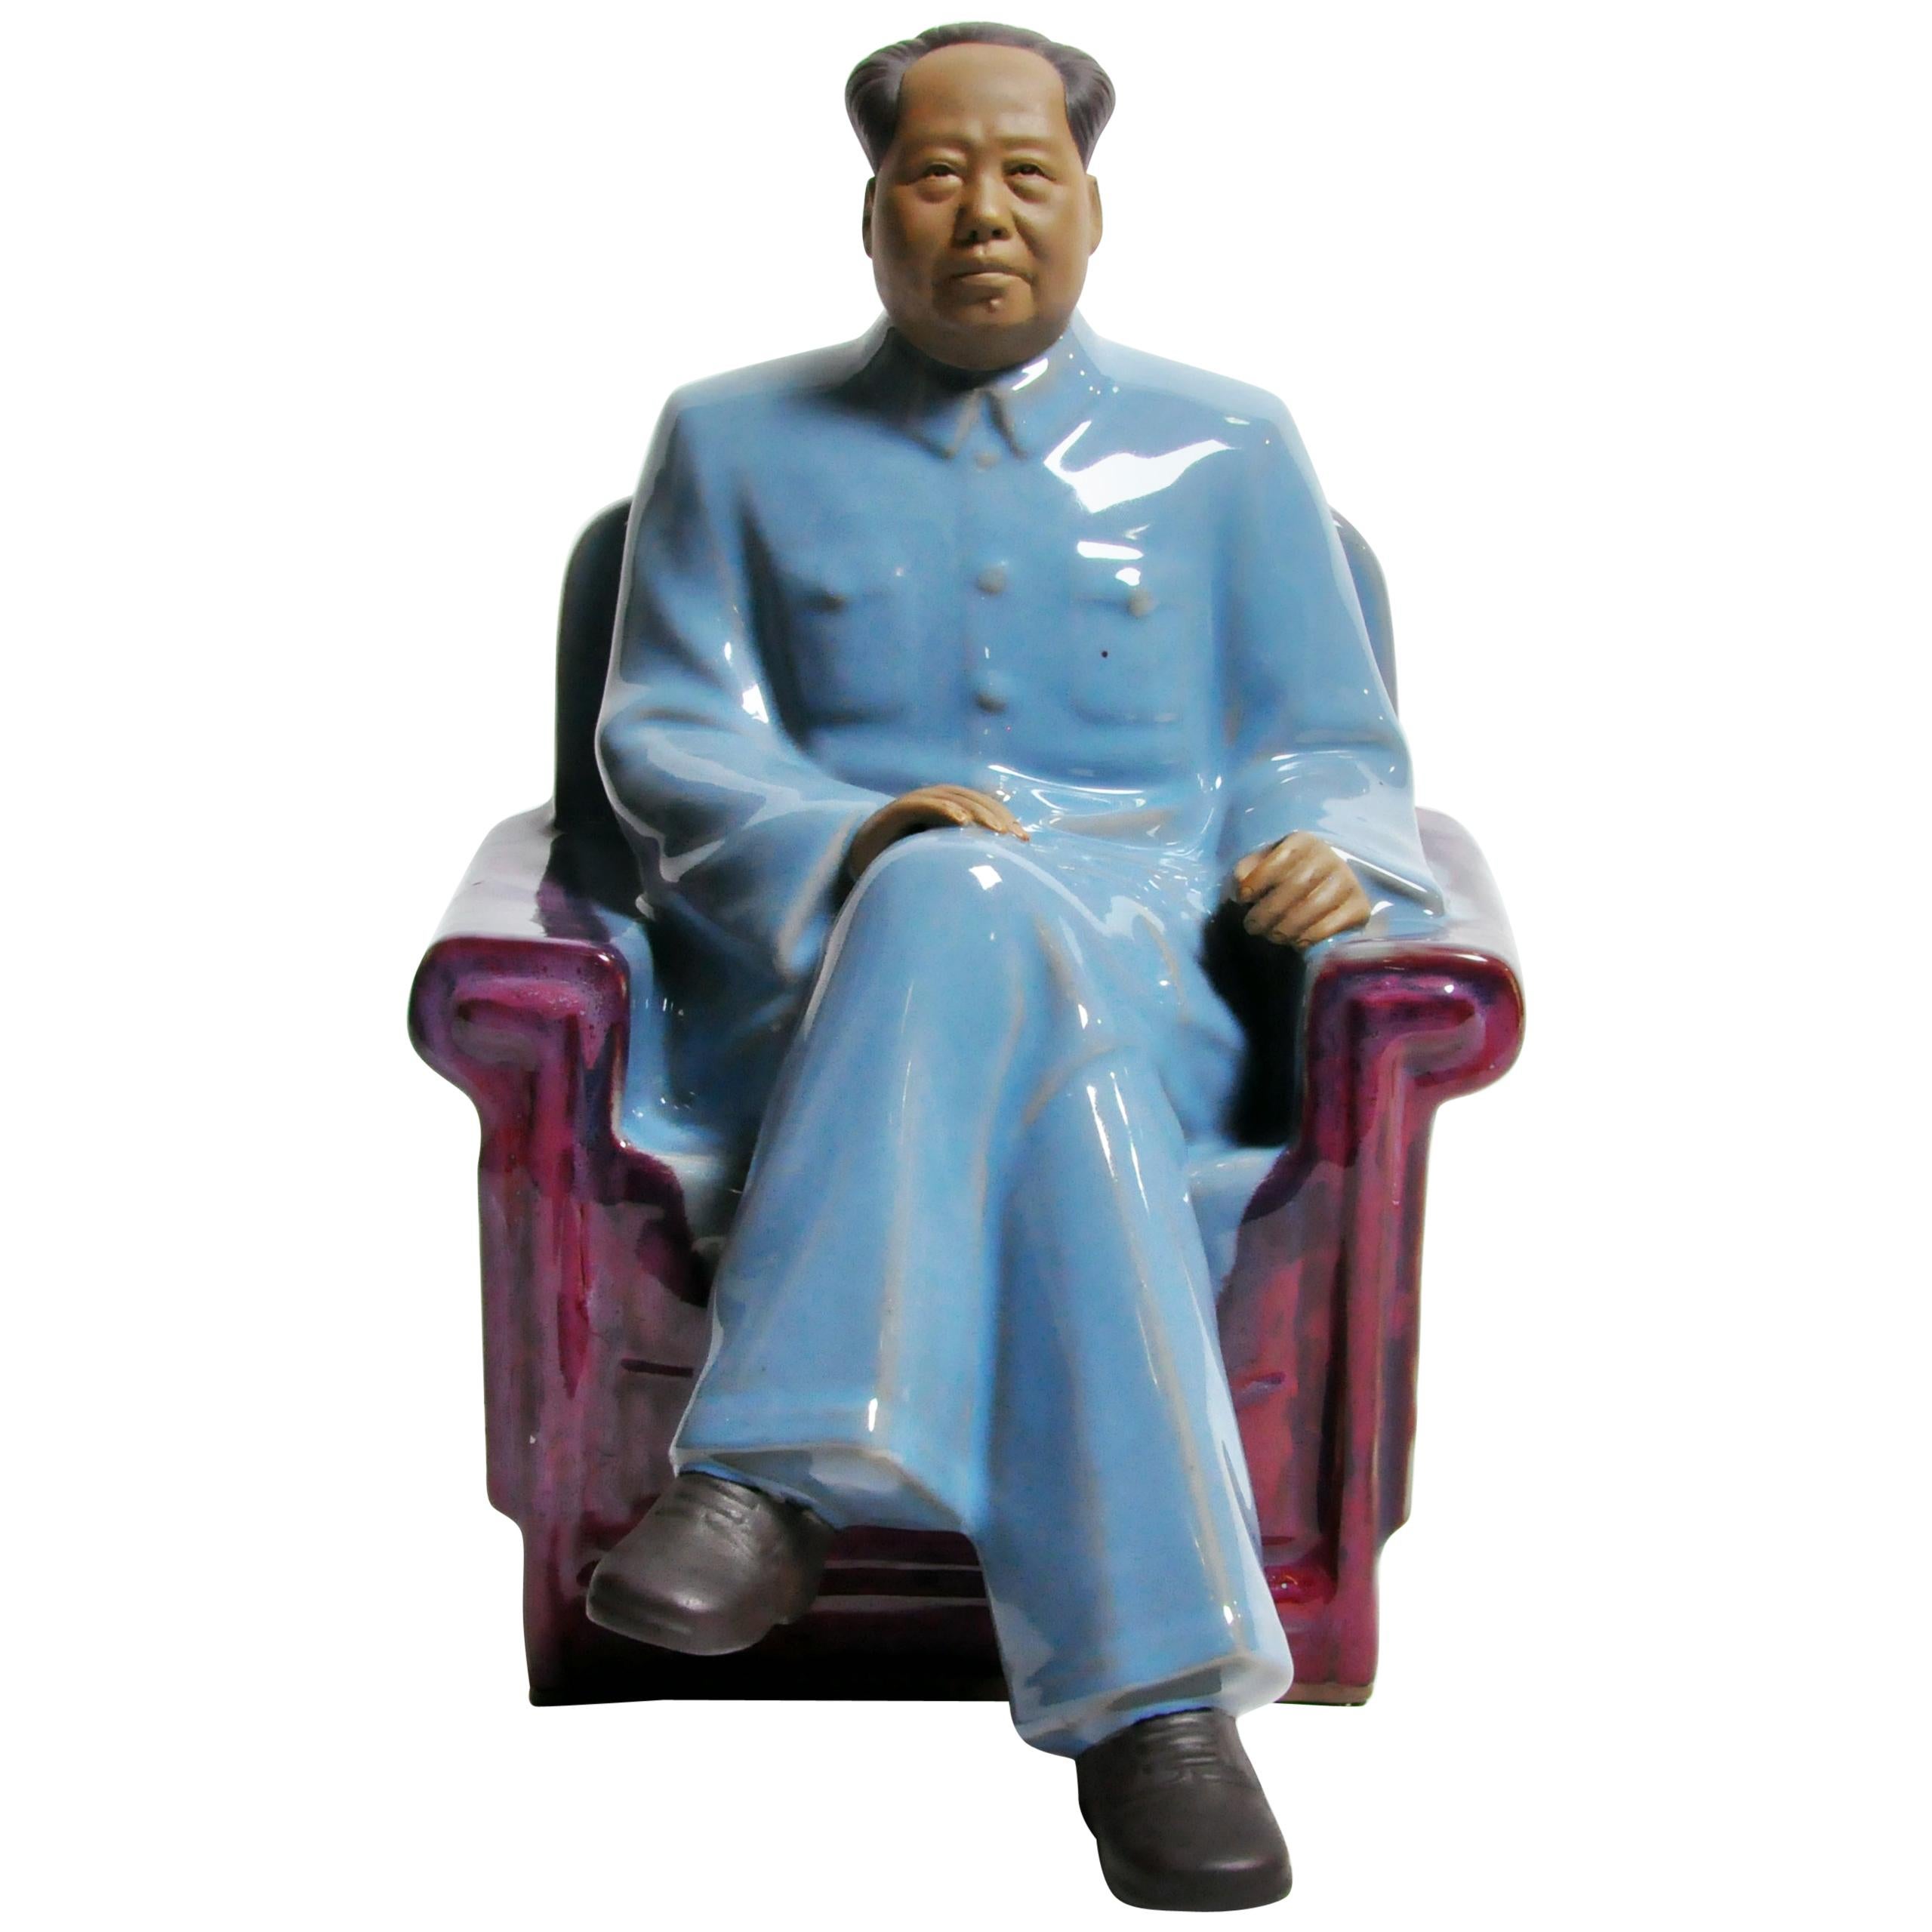 Details about   Chinese First Chairman Mao Tse-tung Bronze Statue 13"H 